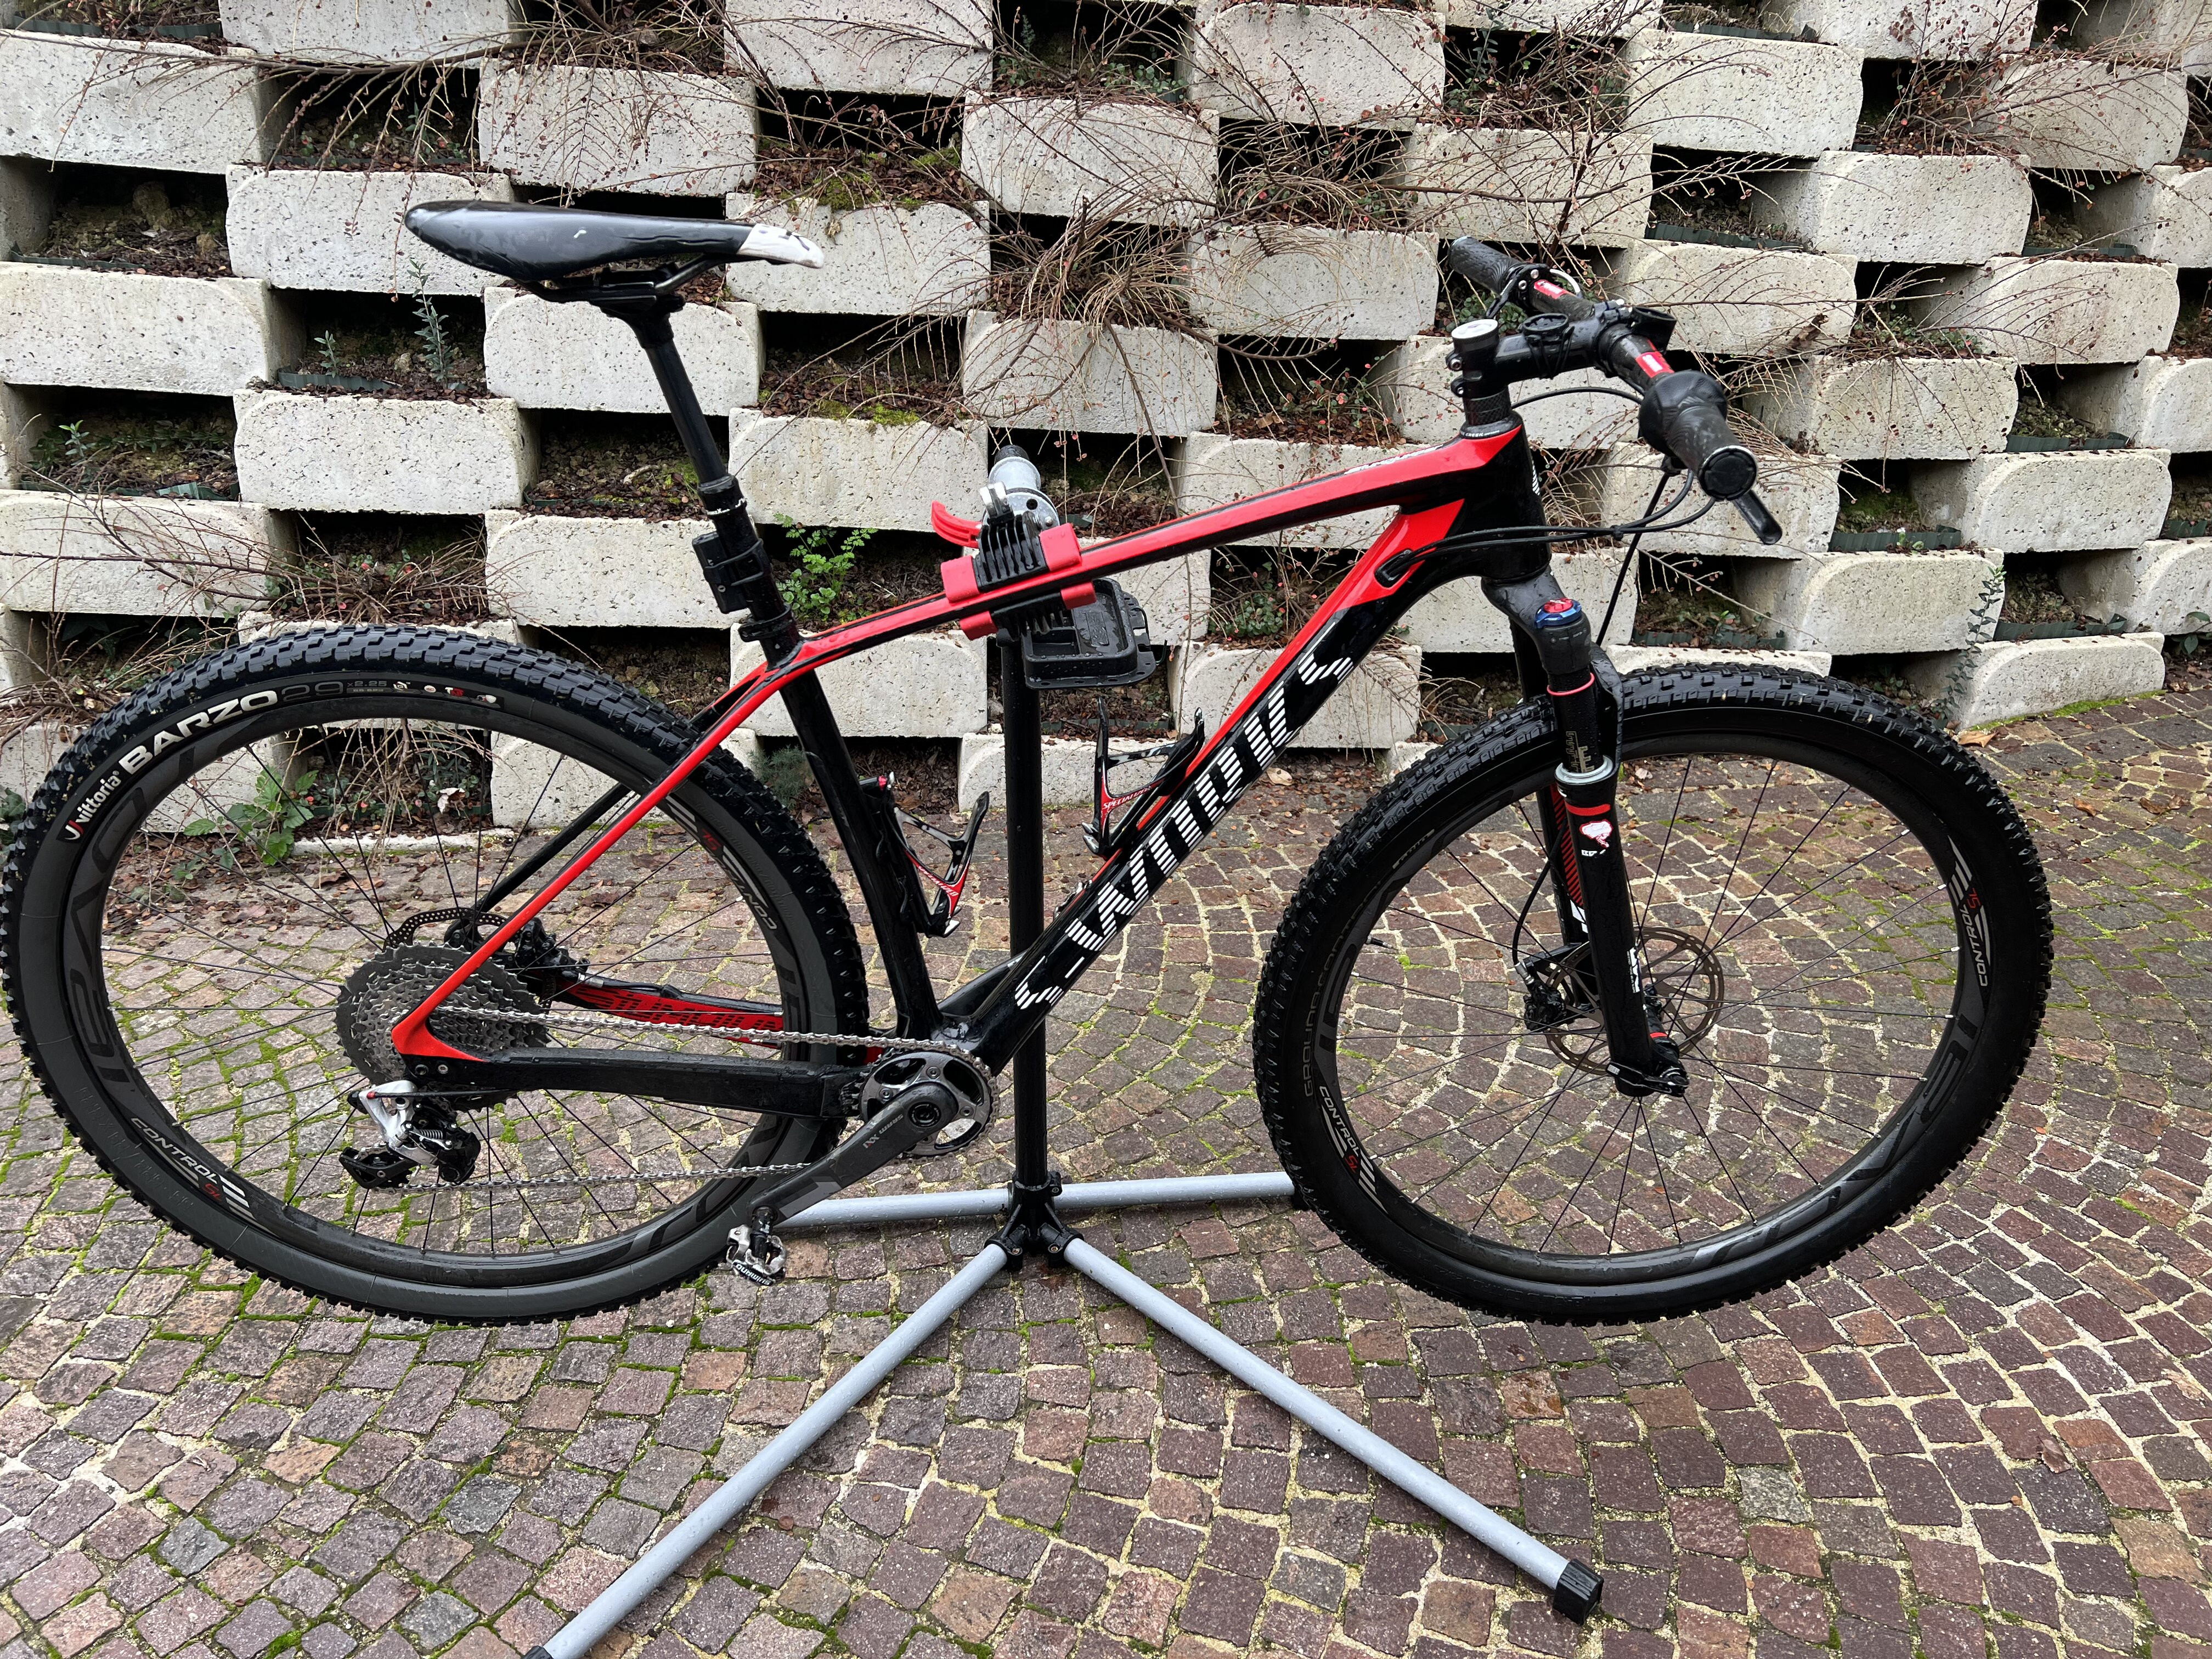 Groene bonen Besparing God Specialized S-Works Stumpjumper 29 World Cup used in l | buycycle